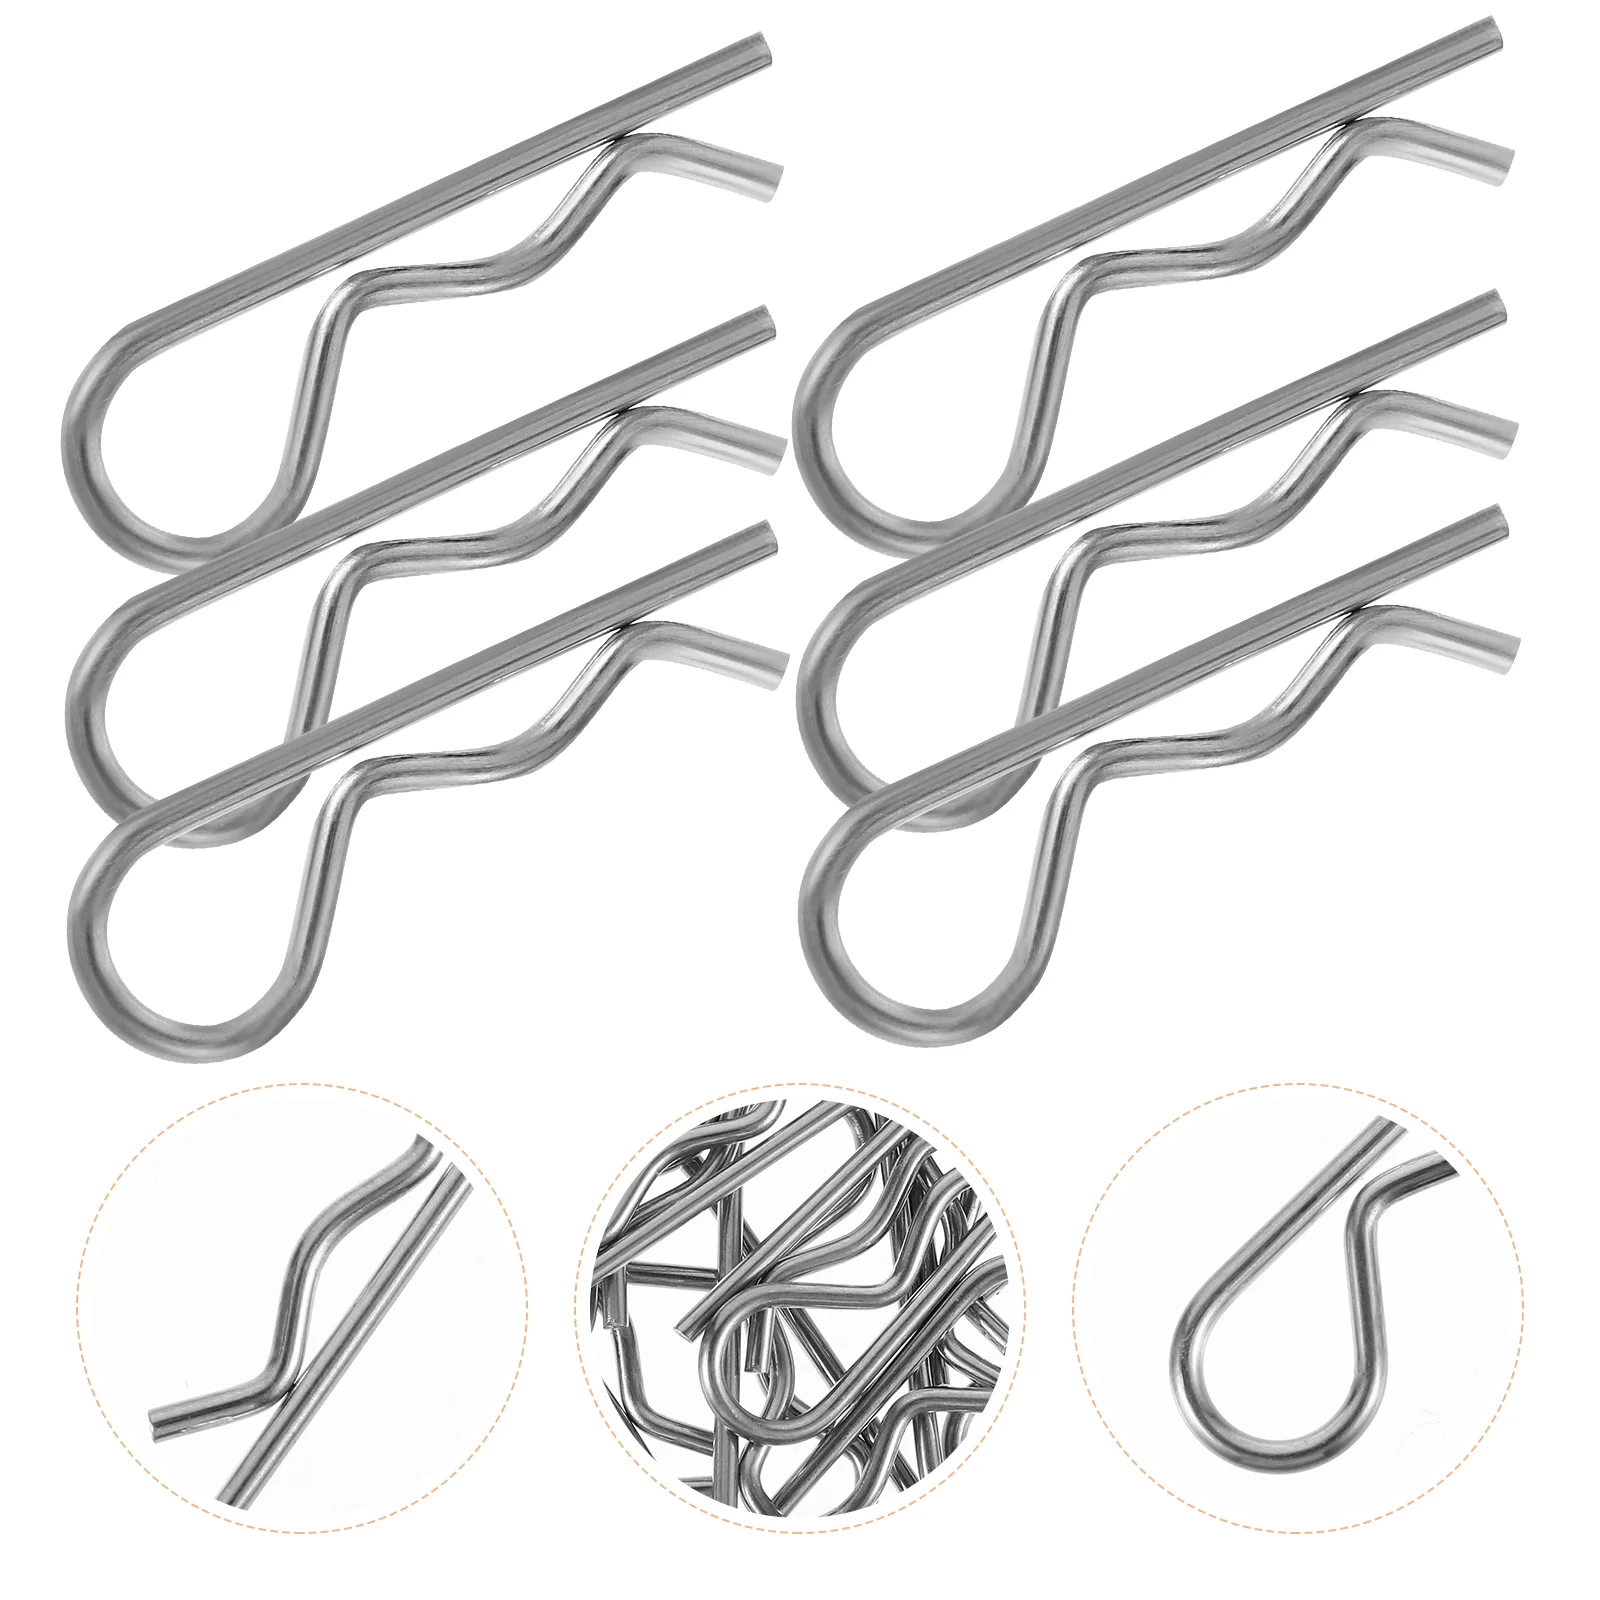 

20 Pcs Pins Hitch Lock System Spring Retaining Wire Hair Keeper Mower Clip 304 Stainless Steel Hardware Heavy Duty